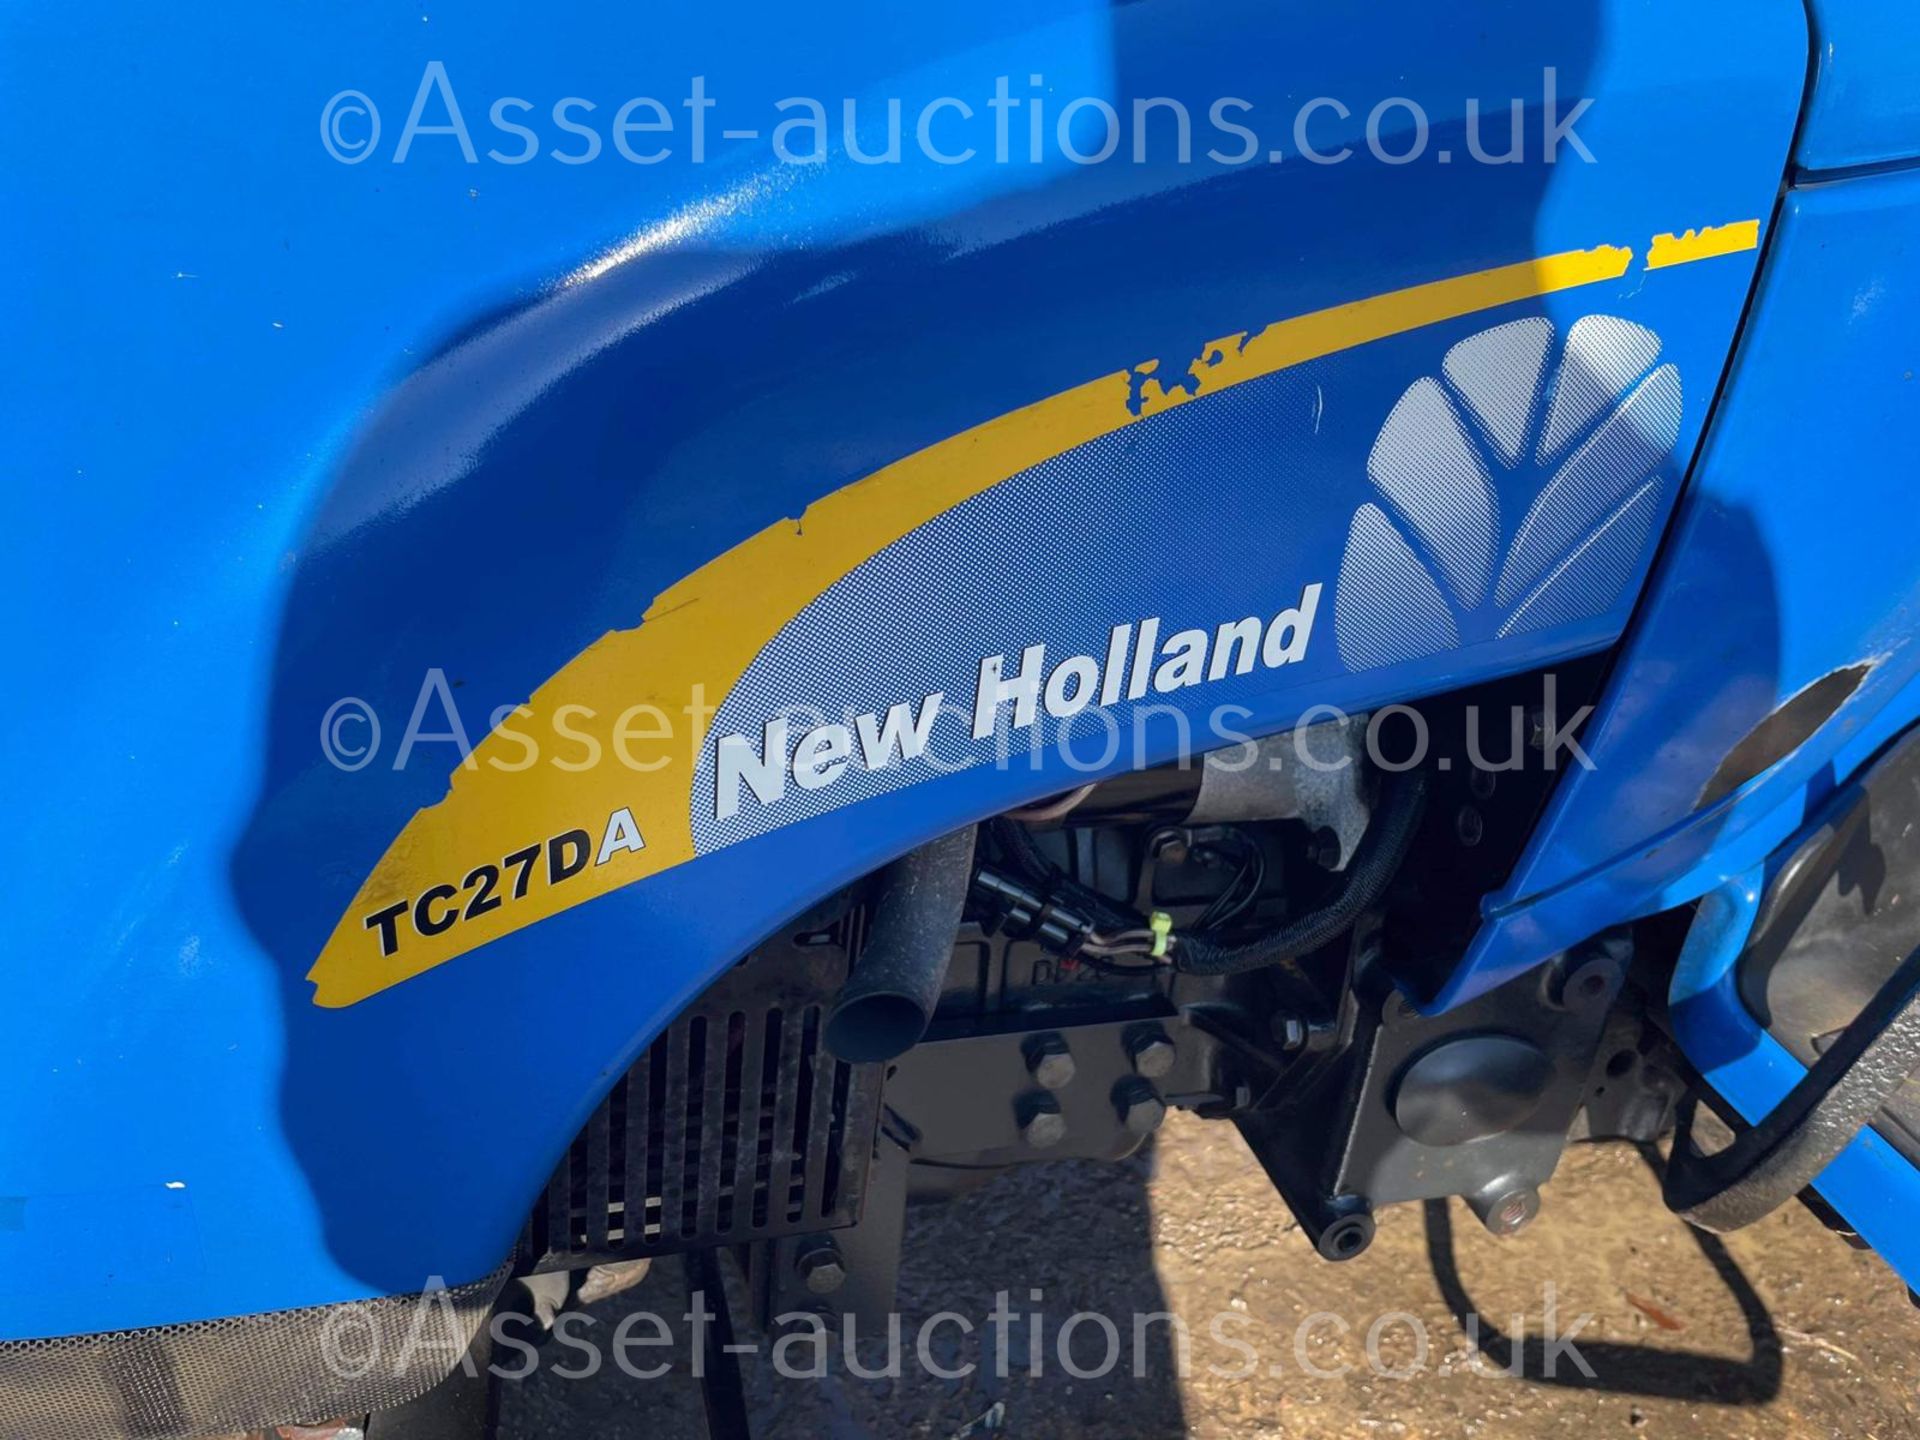 2005 NEW HOLLAND TC27DA 27hp 4WD COMPACT TRACTOR, RUNS DRIVES AND WORKS WELL, ROAD REGISTERED - Image 19 of 26